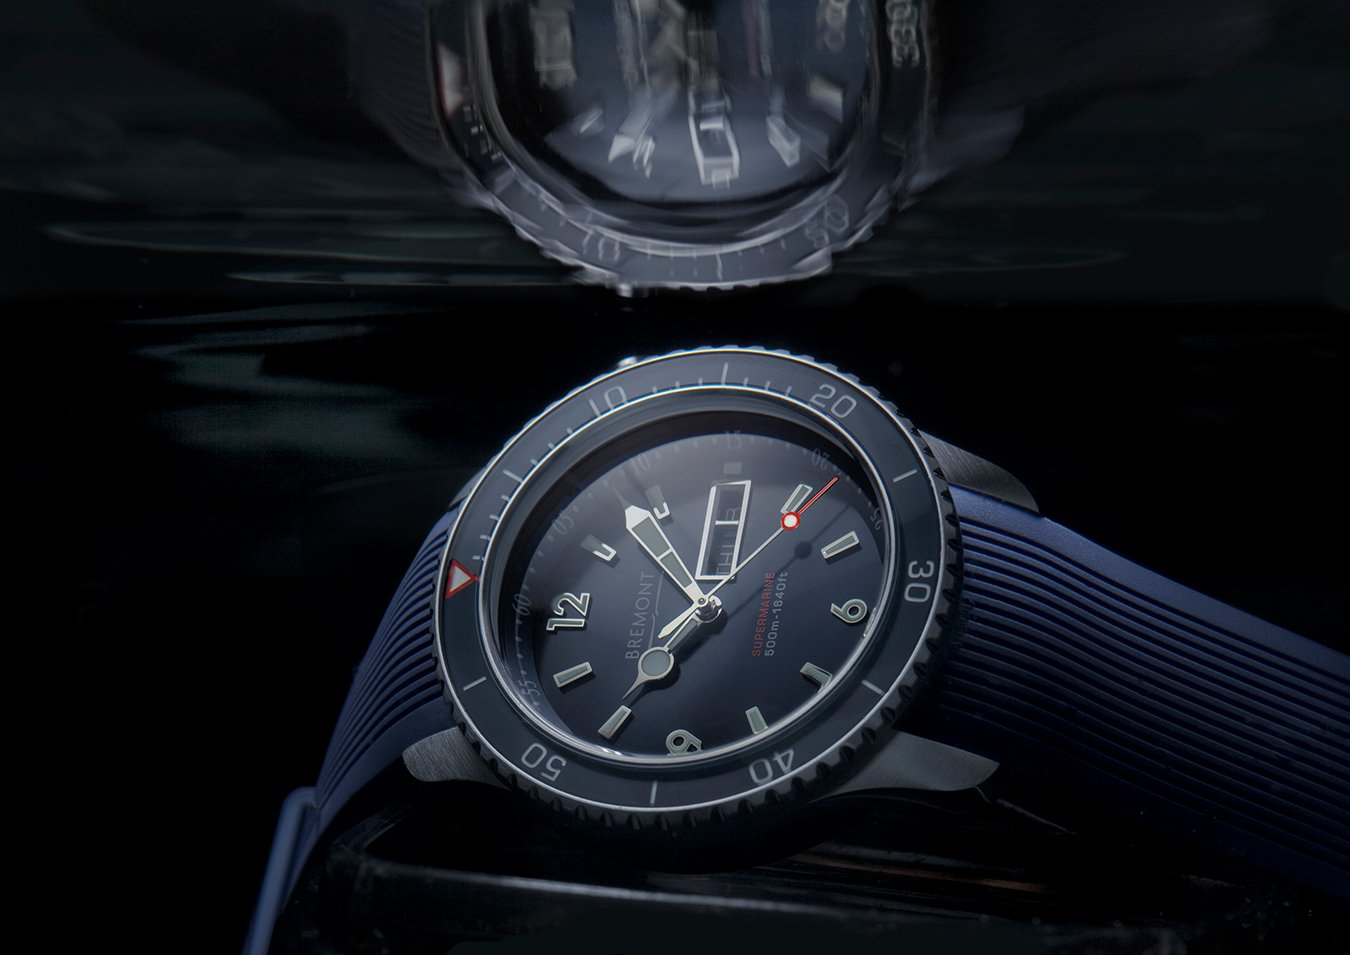 Bremont Watch Company (US)